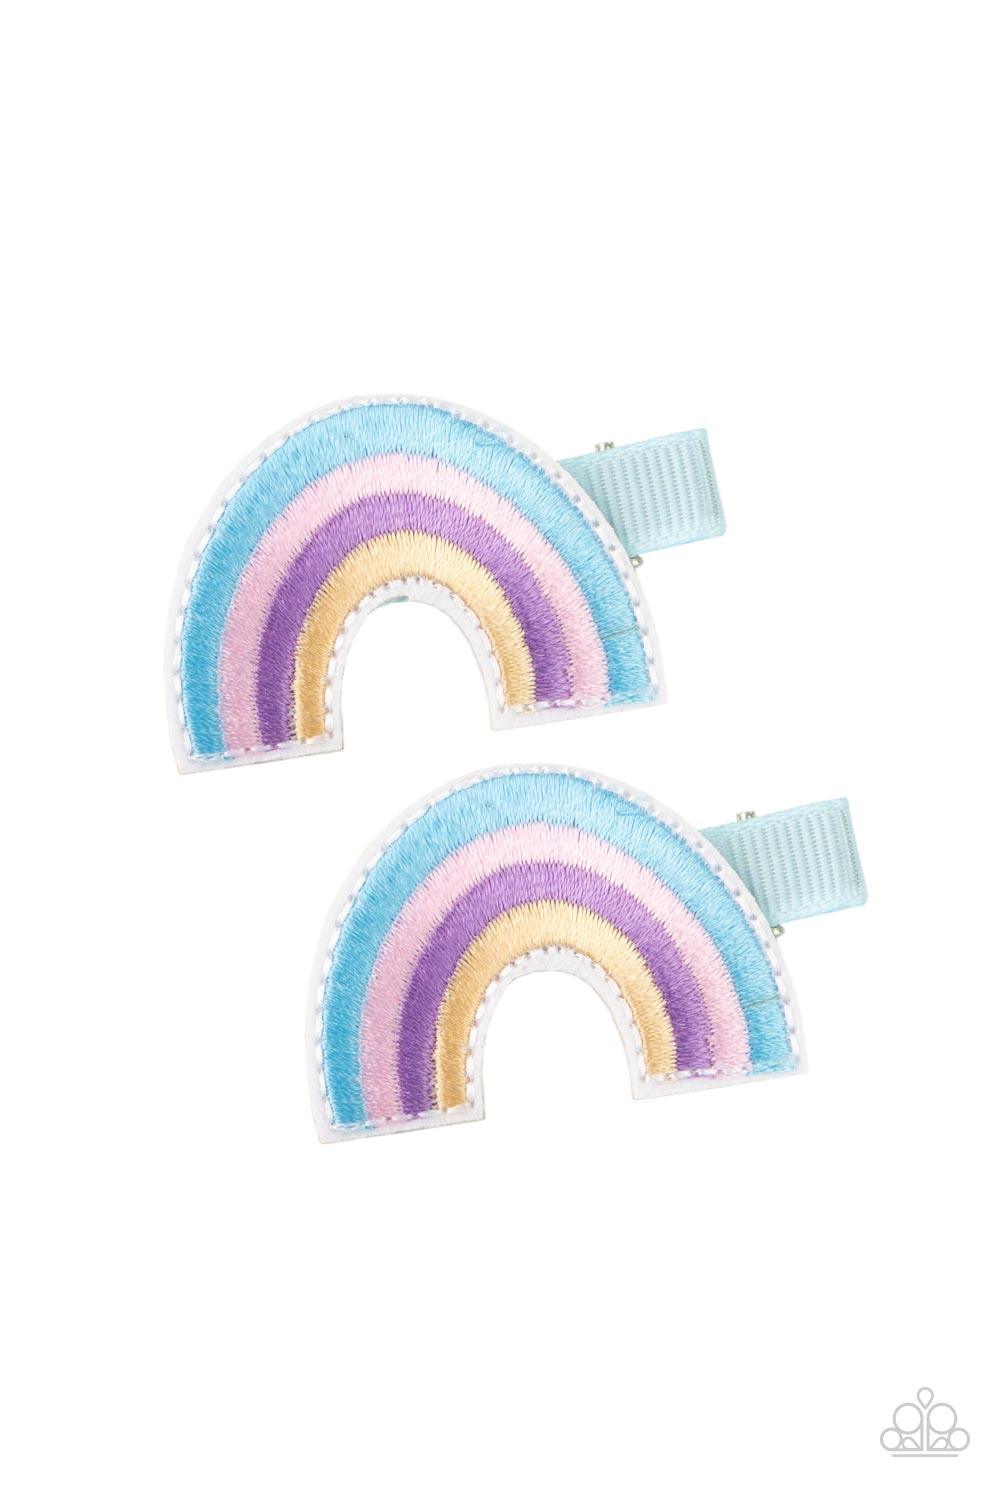 Paparazzi Accessories Follow Your Rainbow - Blue Blue, pink, purple, and golden threaded rows arc into a magical pair of rainbows. Each rainbow features a standard duck bill hair clip on the back. Sold as one pair of hair clips. Hair Claws & Clips